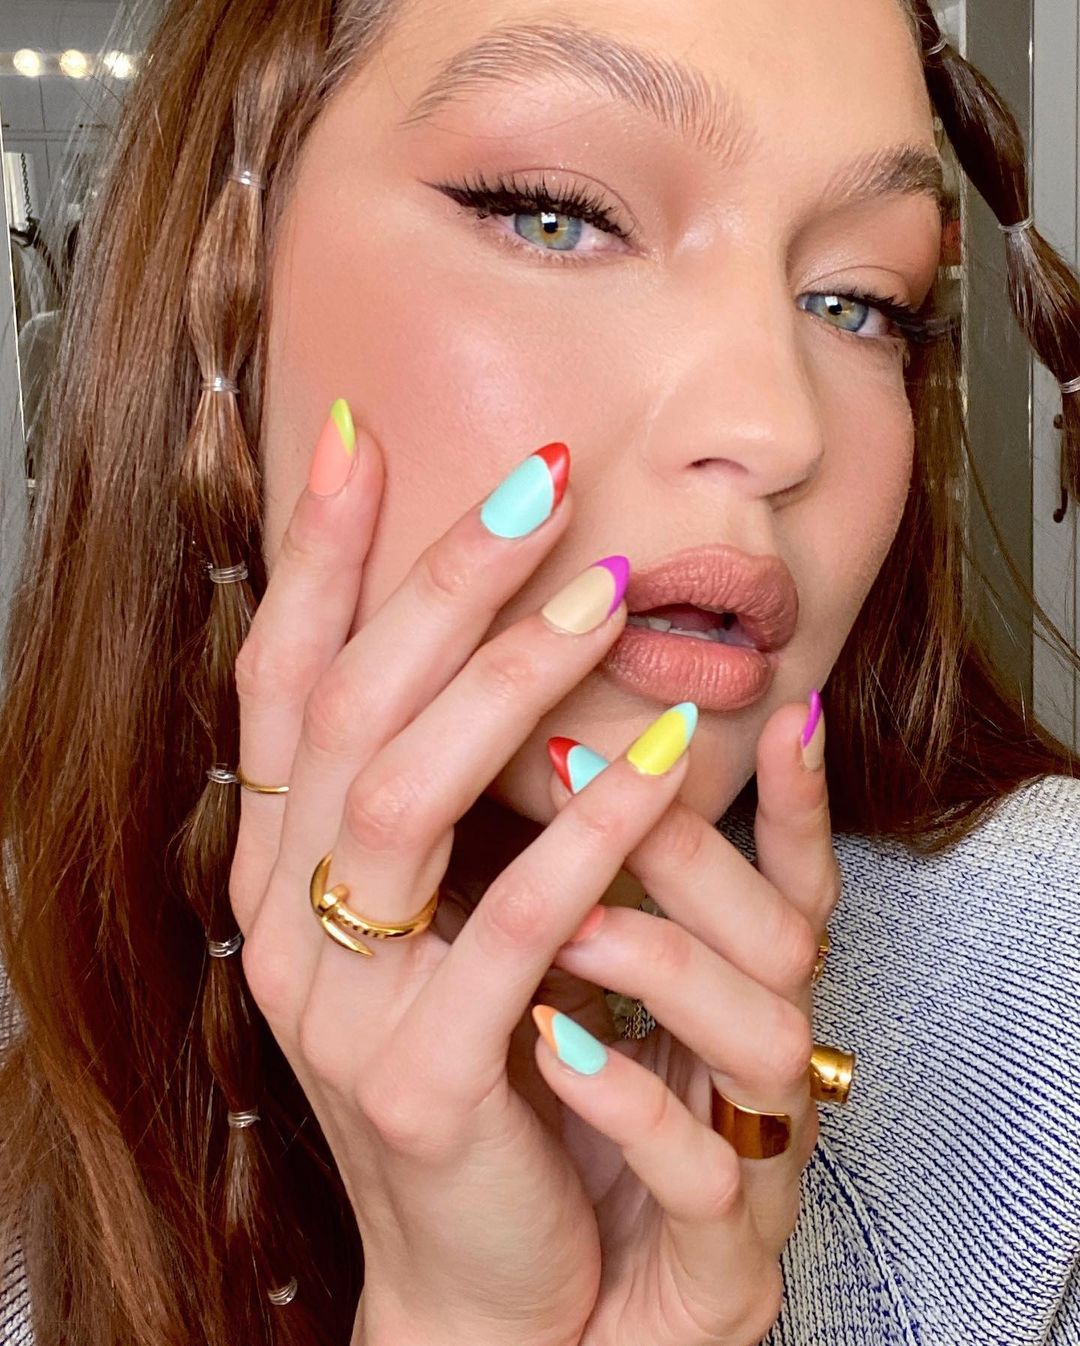 Gigi Hadid shared her poses in Makeup Room 04/26/2021